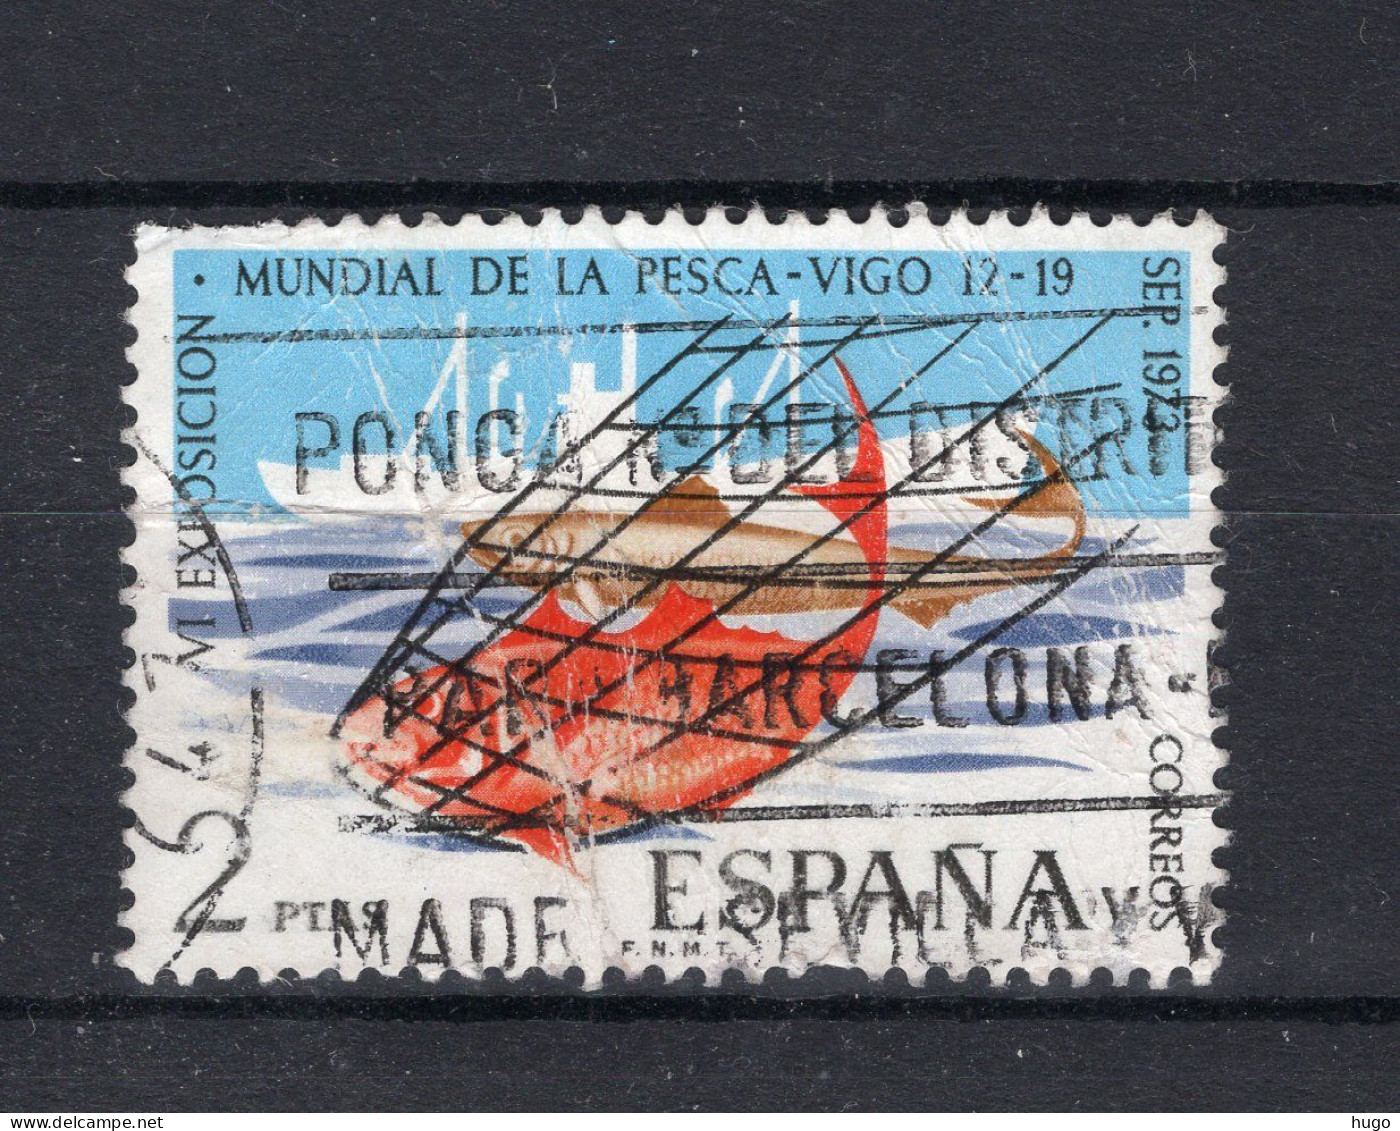 SPANJE Yt. 1800° Gestempeld 1973 - Used Stamps